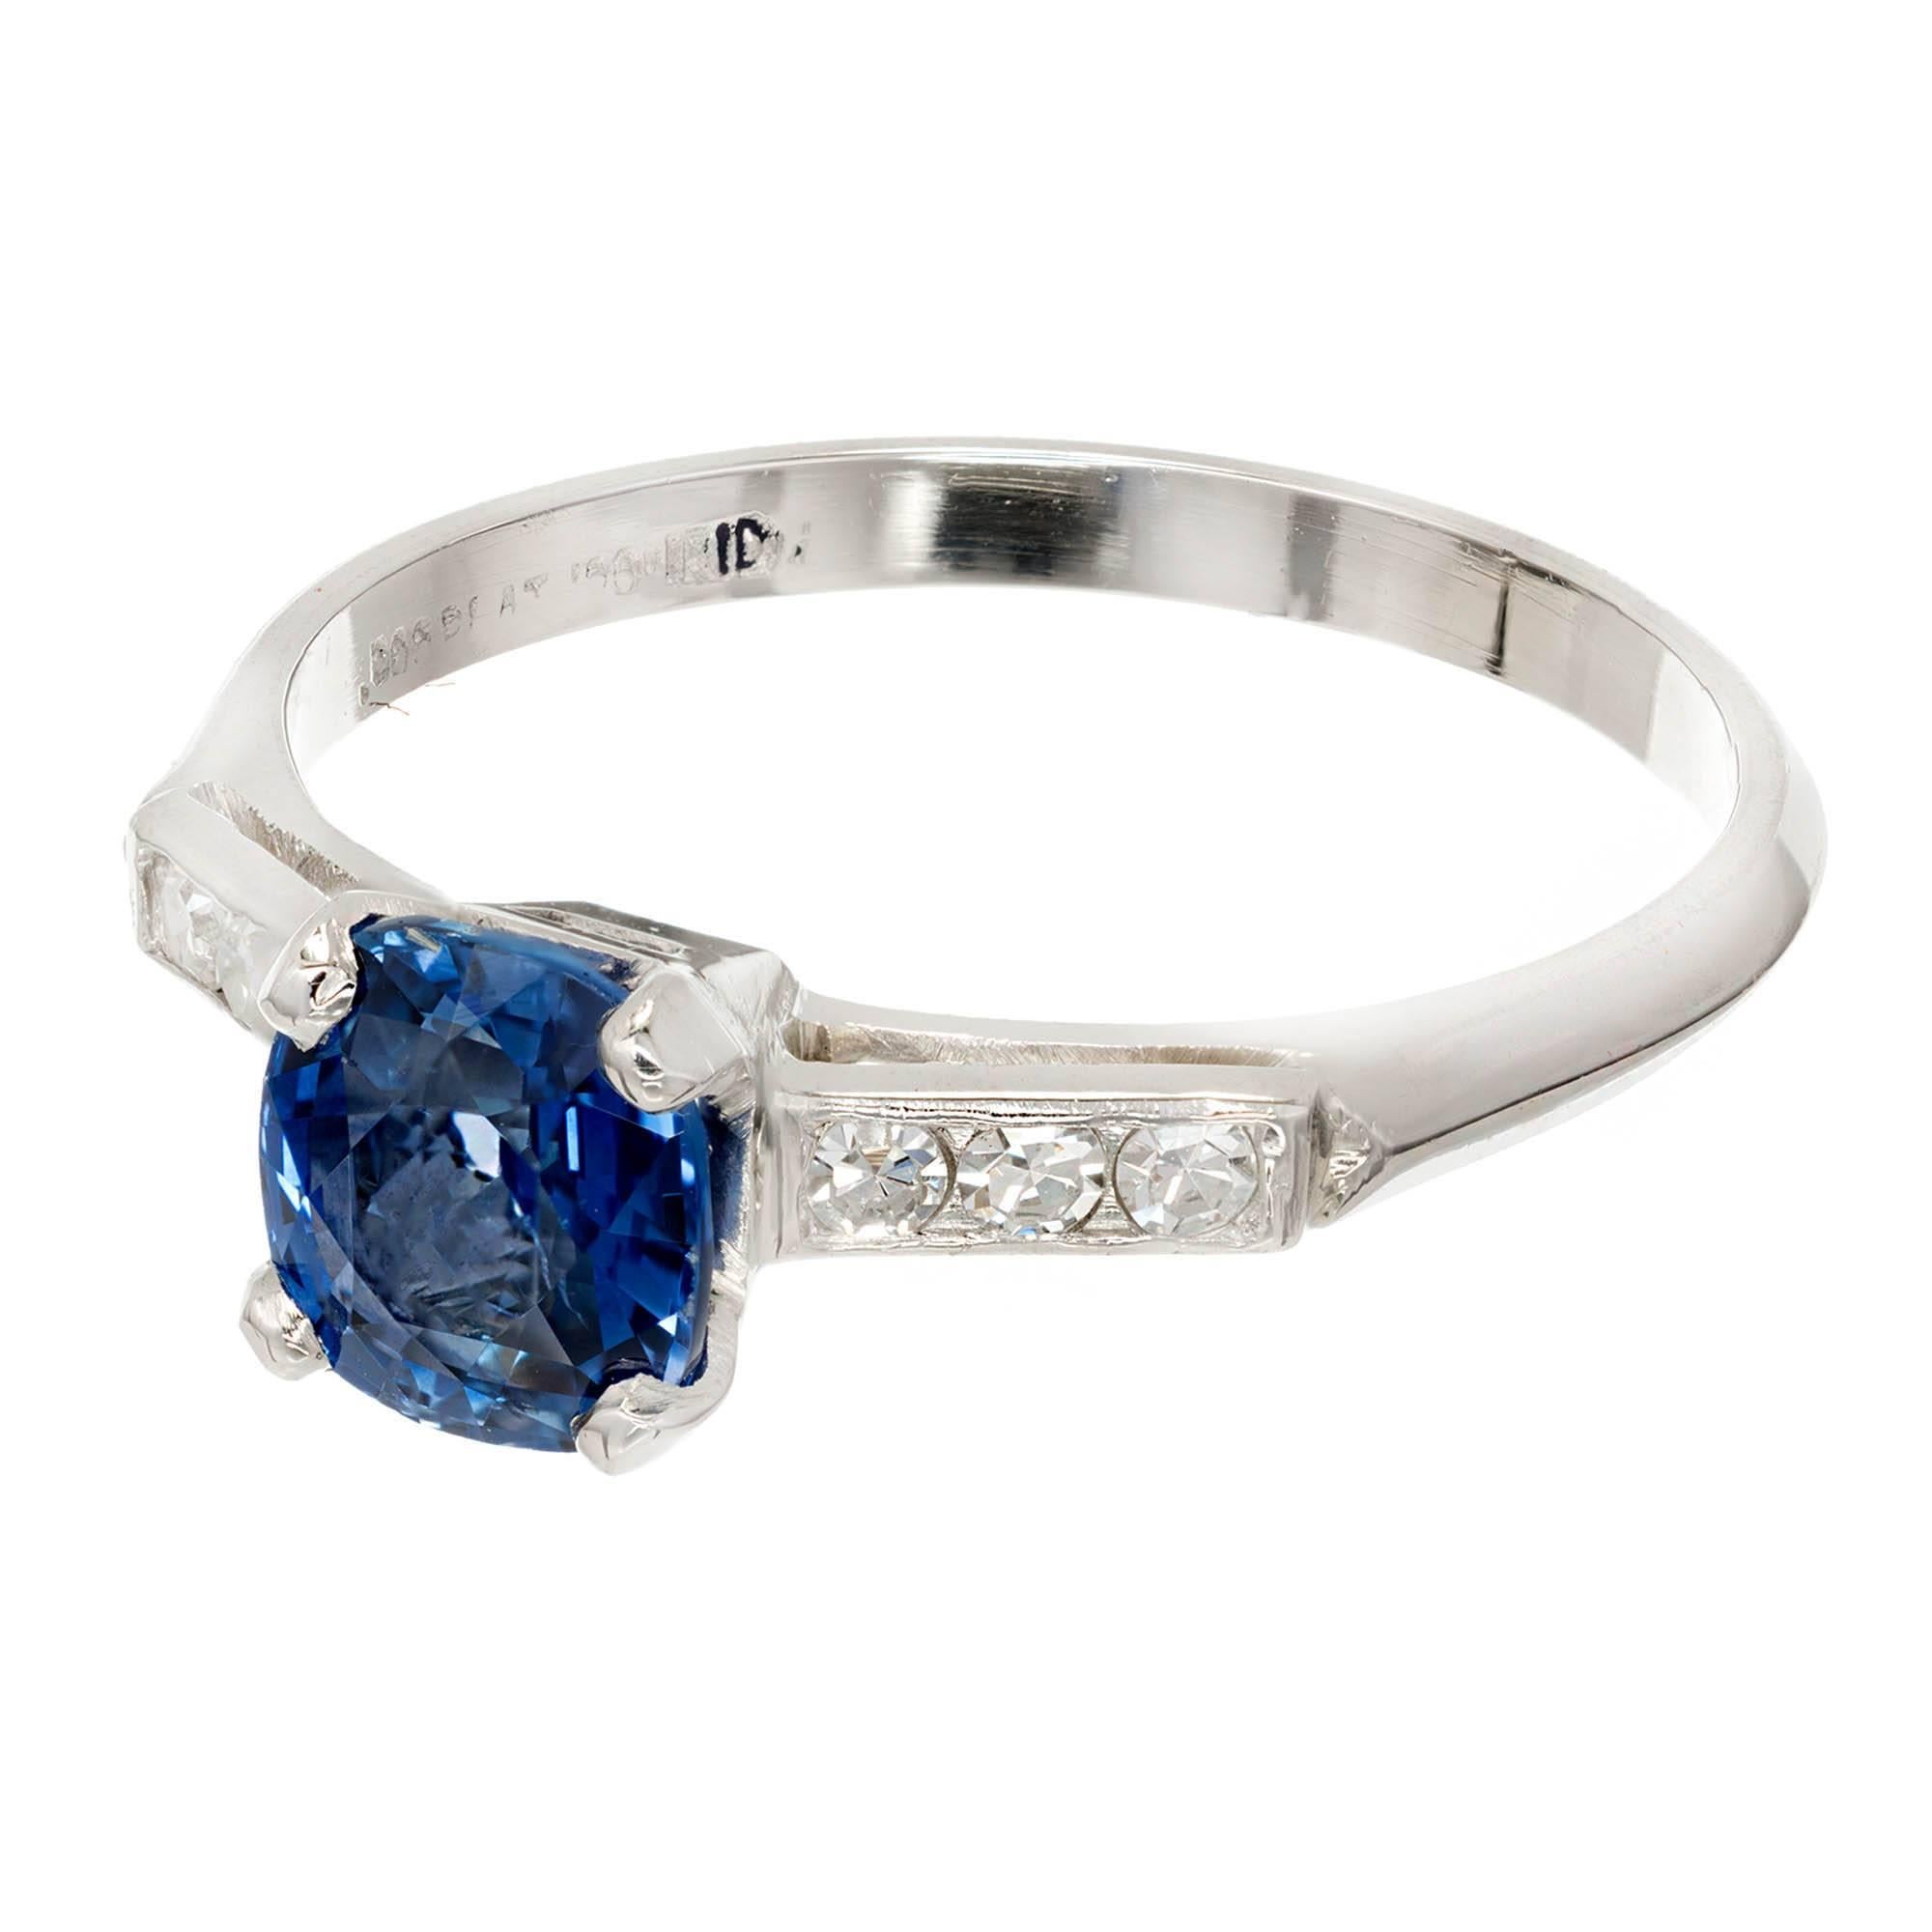  Vintage early 1900s Sapphire Platinum Diamond engagement ring, with an original old European cut Sapphire. GIA certified simple heat only. Simple Diamond accents.

1 oval blue Sapphire, approx. total weight 1.03cts, SI, GIA certificate